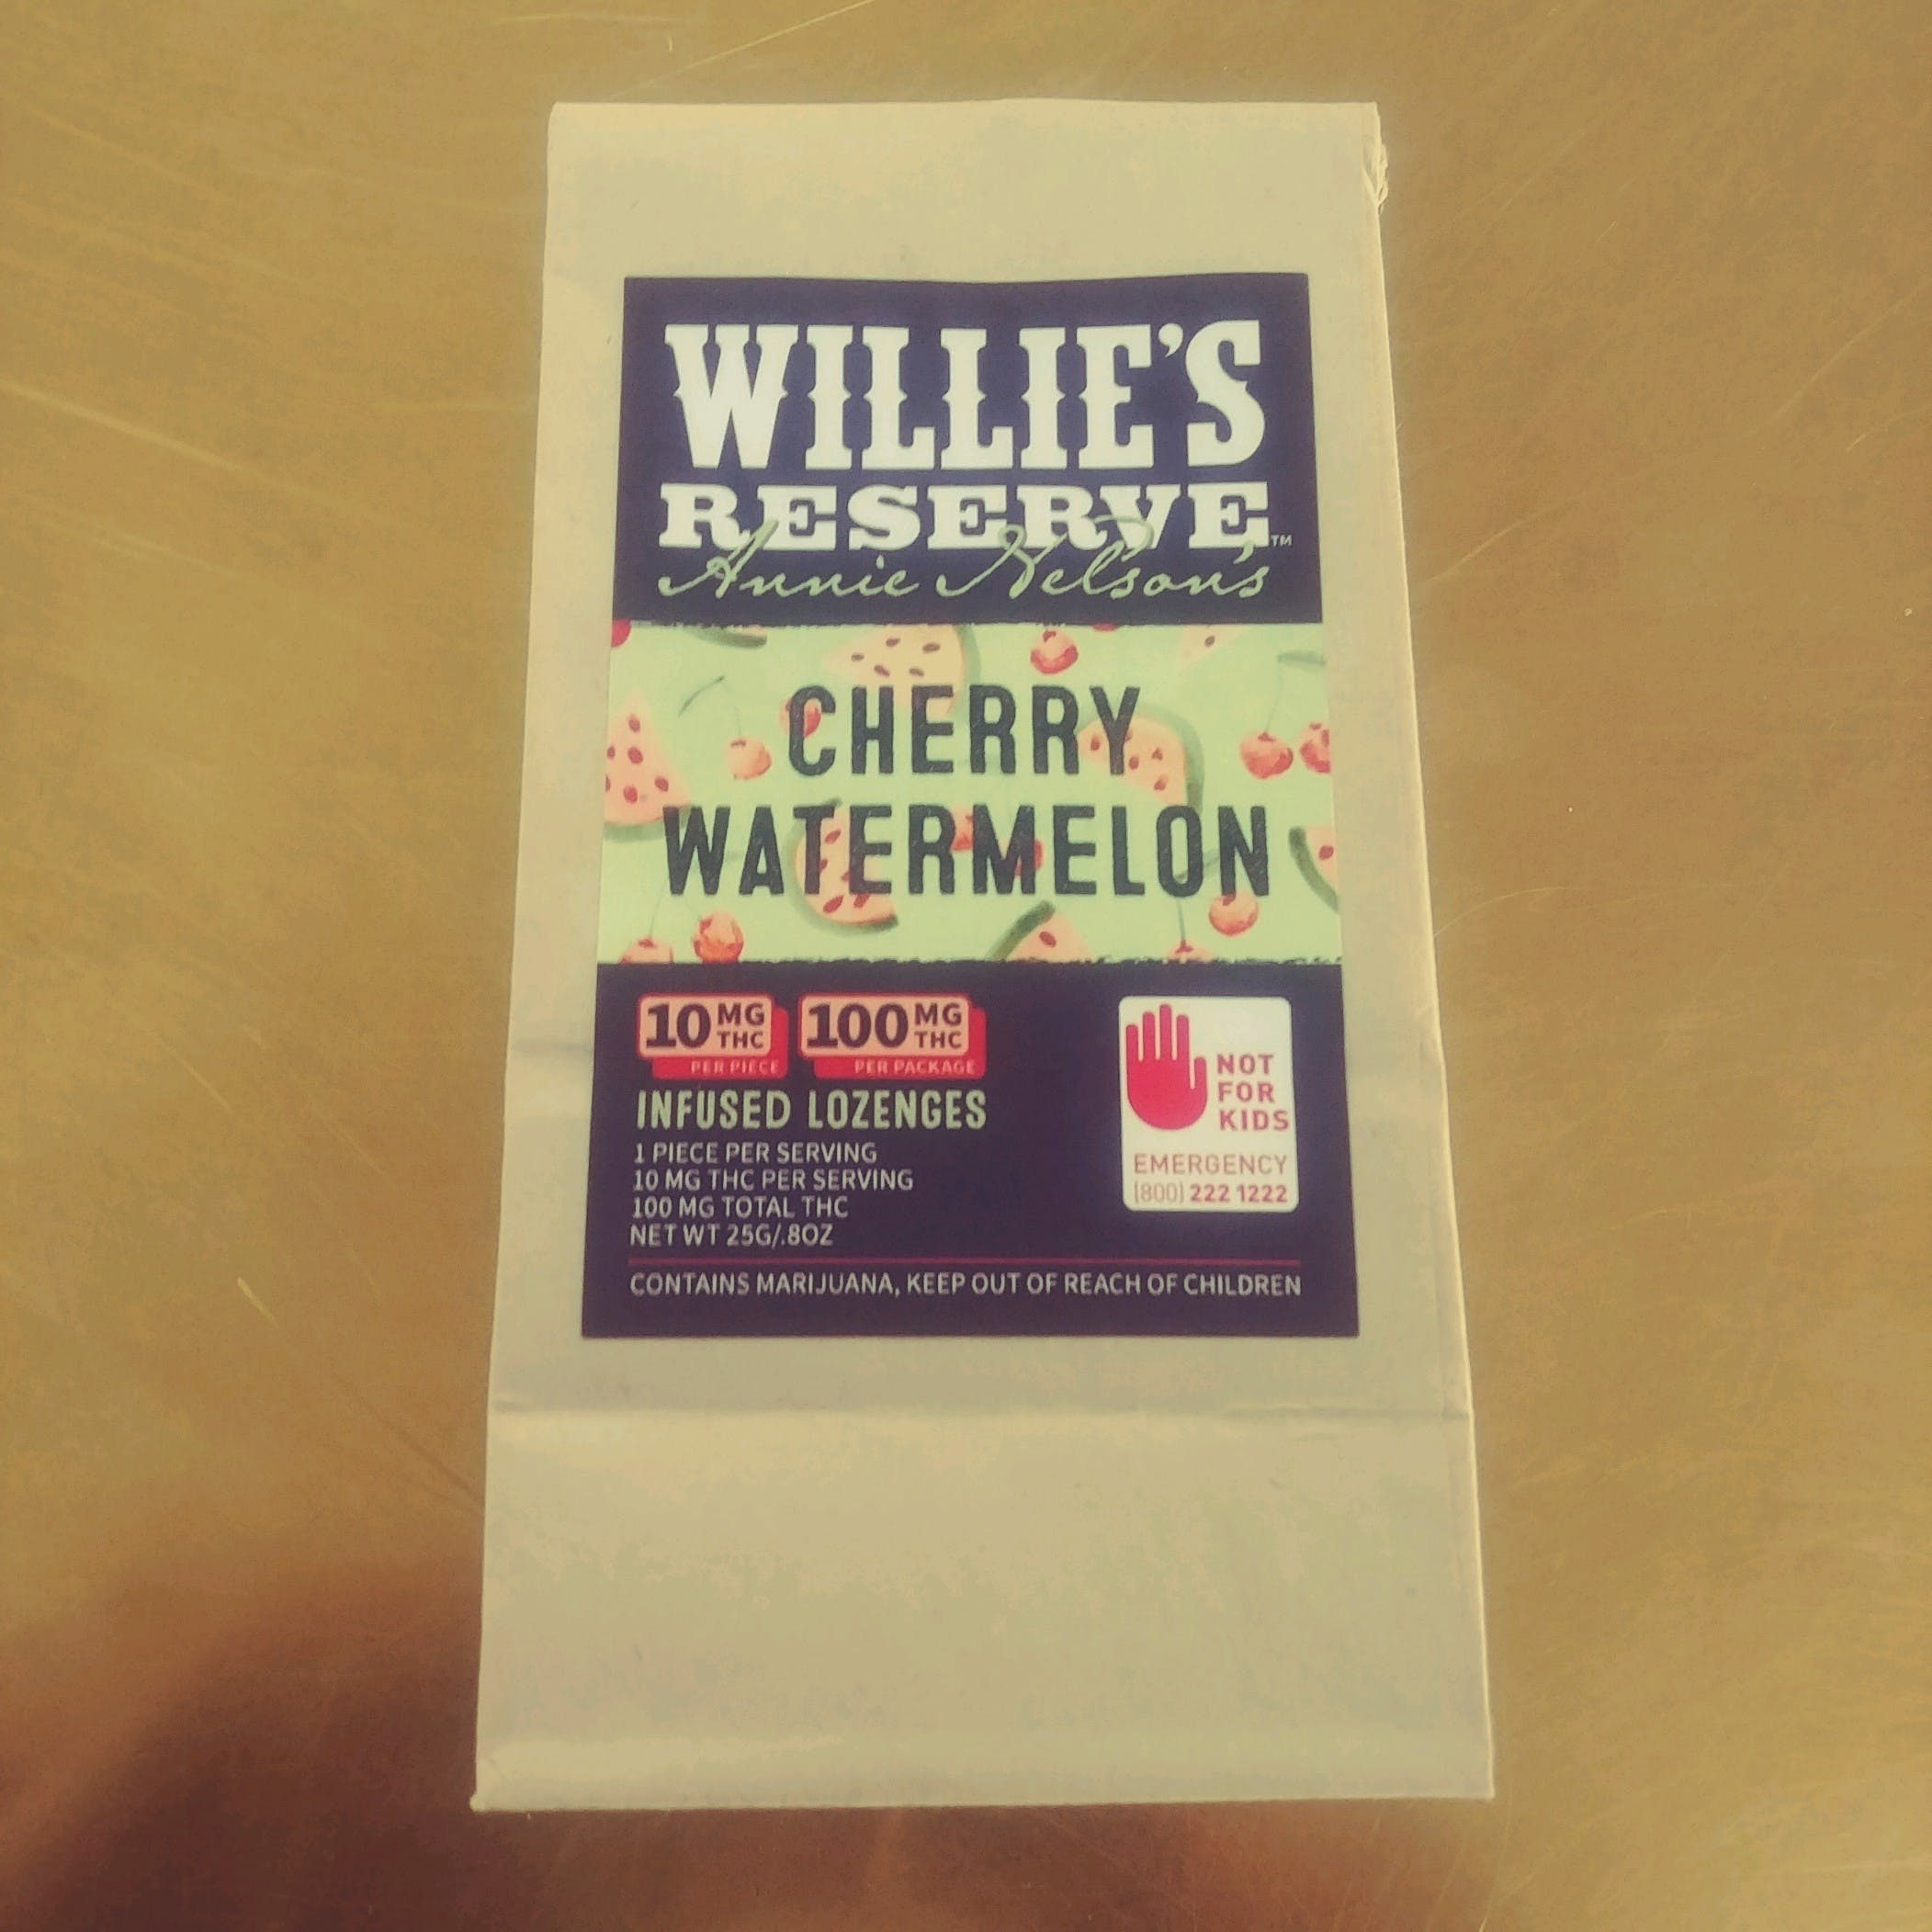 Cherry Watermelon 10mg 10 Pack by Willie's Reserve